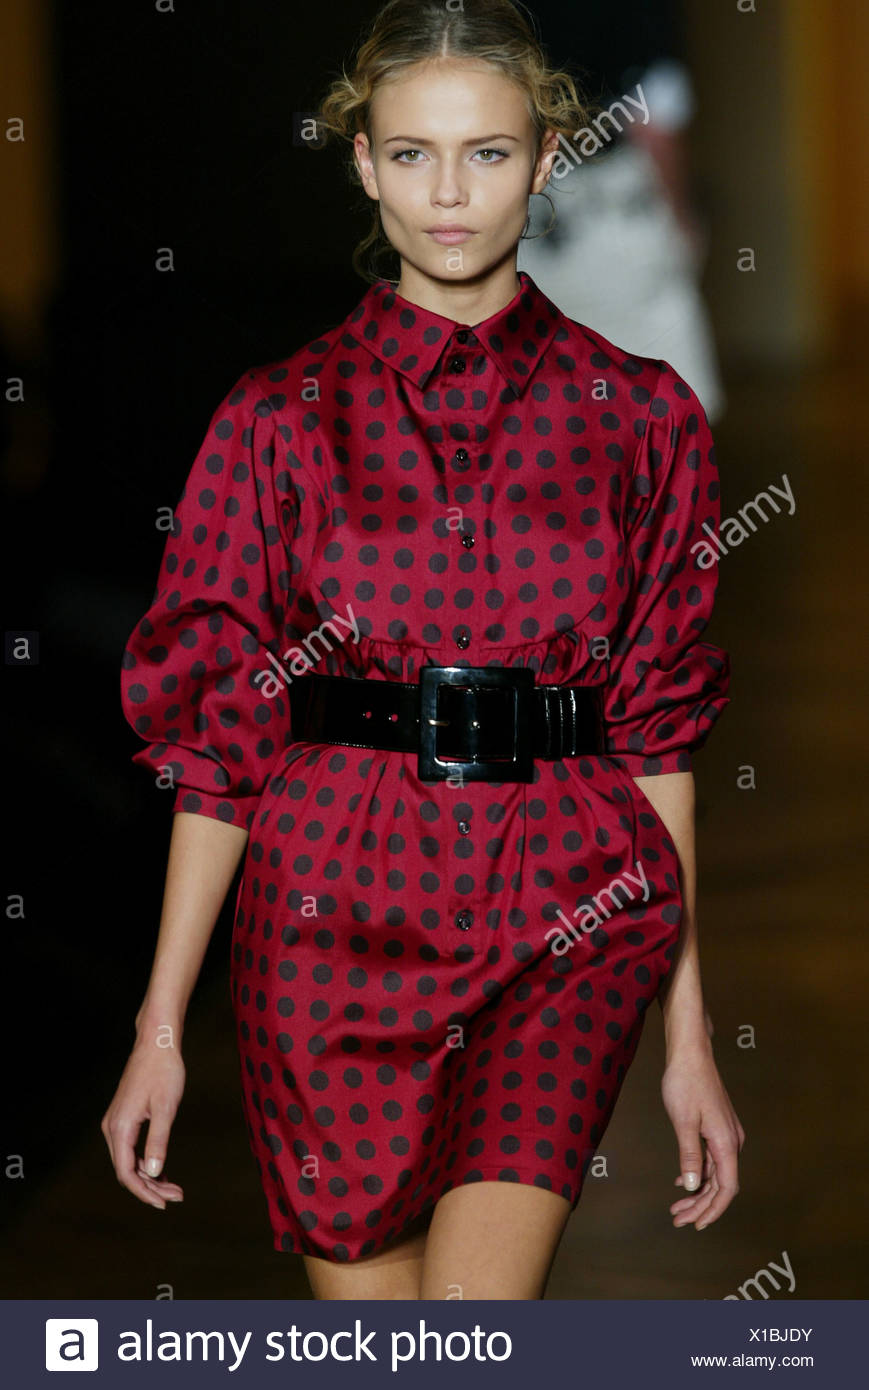 Ysl Catwalk High Resolution Stock Photography and Images - Alamy